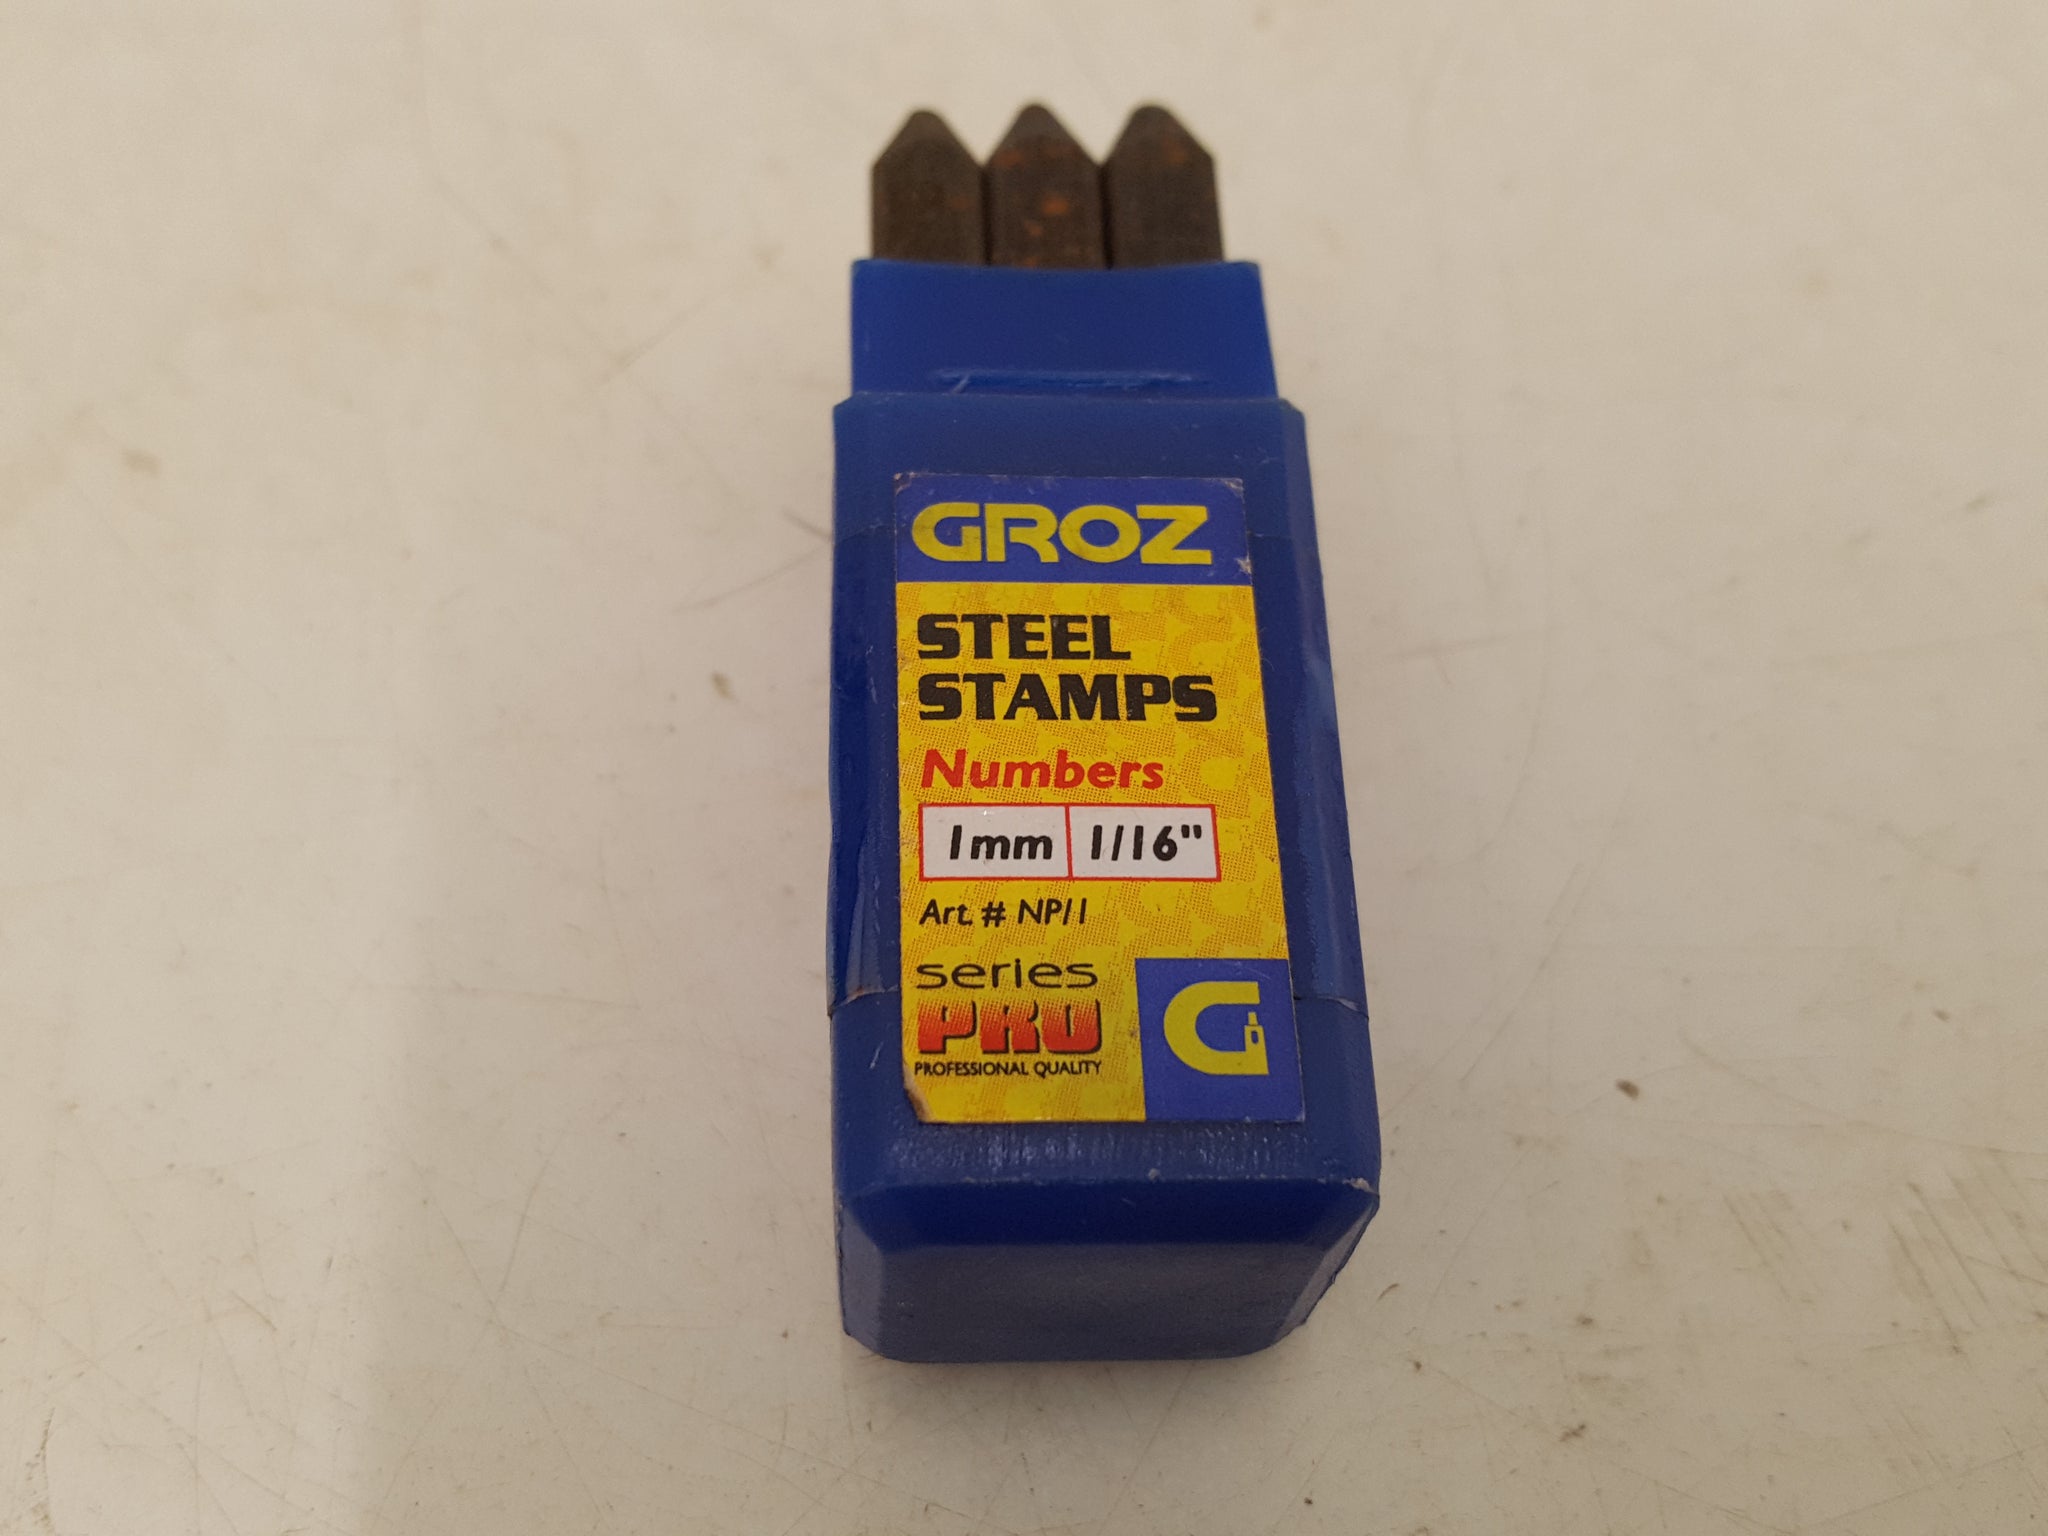 Small Set of 9 Groz 1mm / 1/16" Steel Stamps 0 - 9 34402